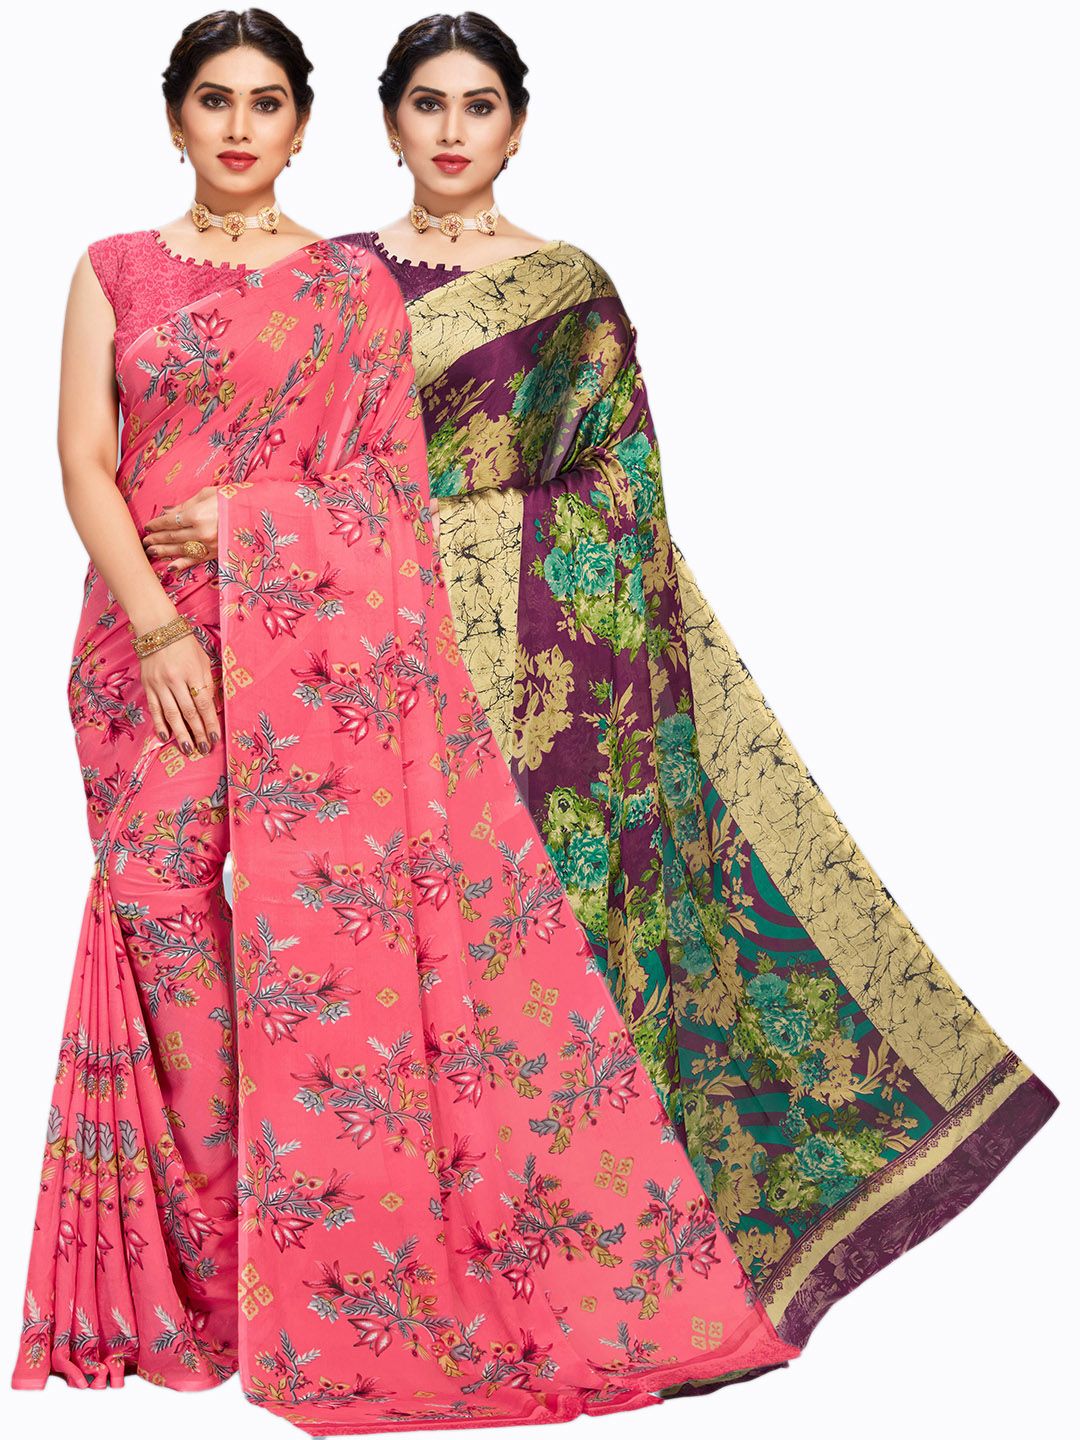 MS RETAIL Green & Pink Floral Saree Price in India